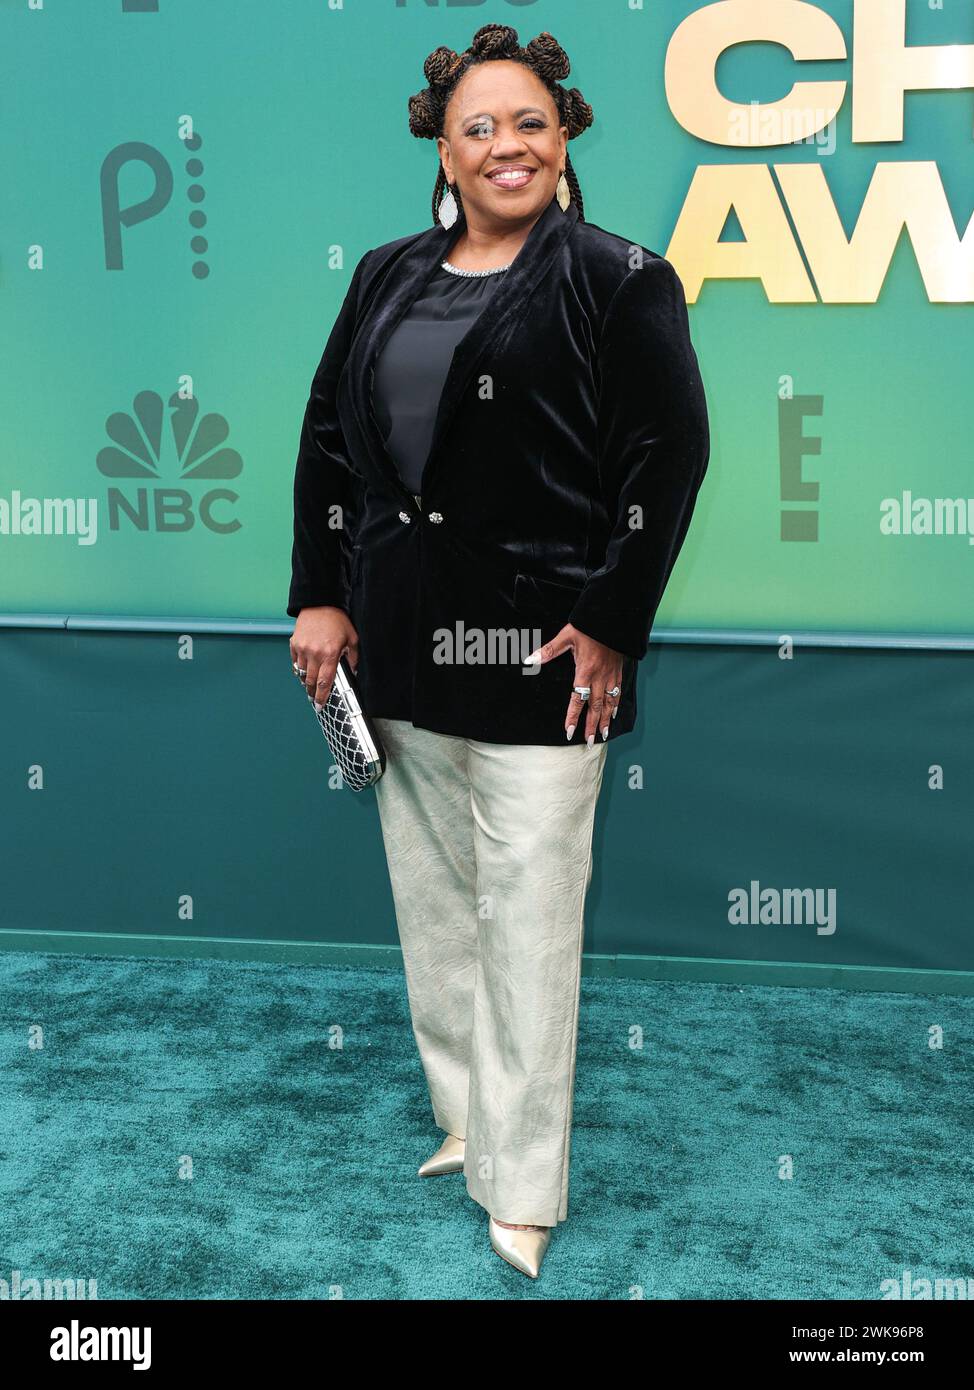 SANTA MONICA, LOS ANGELES, CALIFORNIA, USA - FEBRUARY 18: Chandra Wilson arrives at the 49th Annual People's Choice Awards 2024 held at The Barker Hangar on February 18, 2024 in Santa Monica, Los Angeles, California, United States. (Photo by Xavier Collin/Image Press Agency) Stock Photo